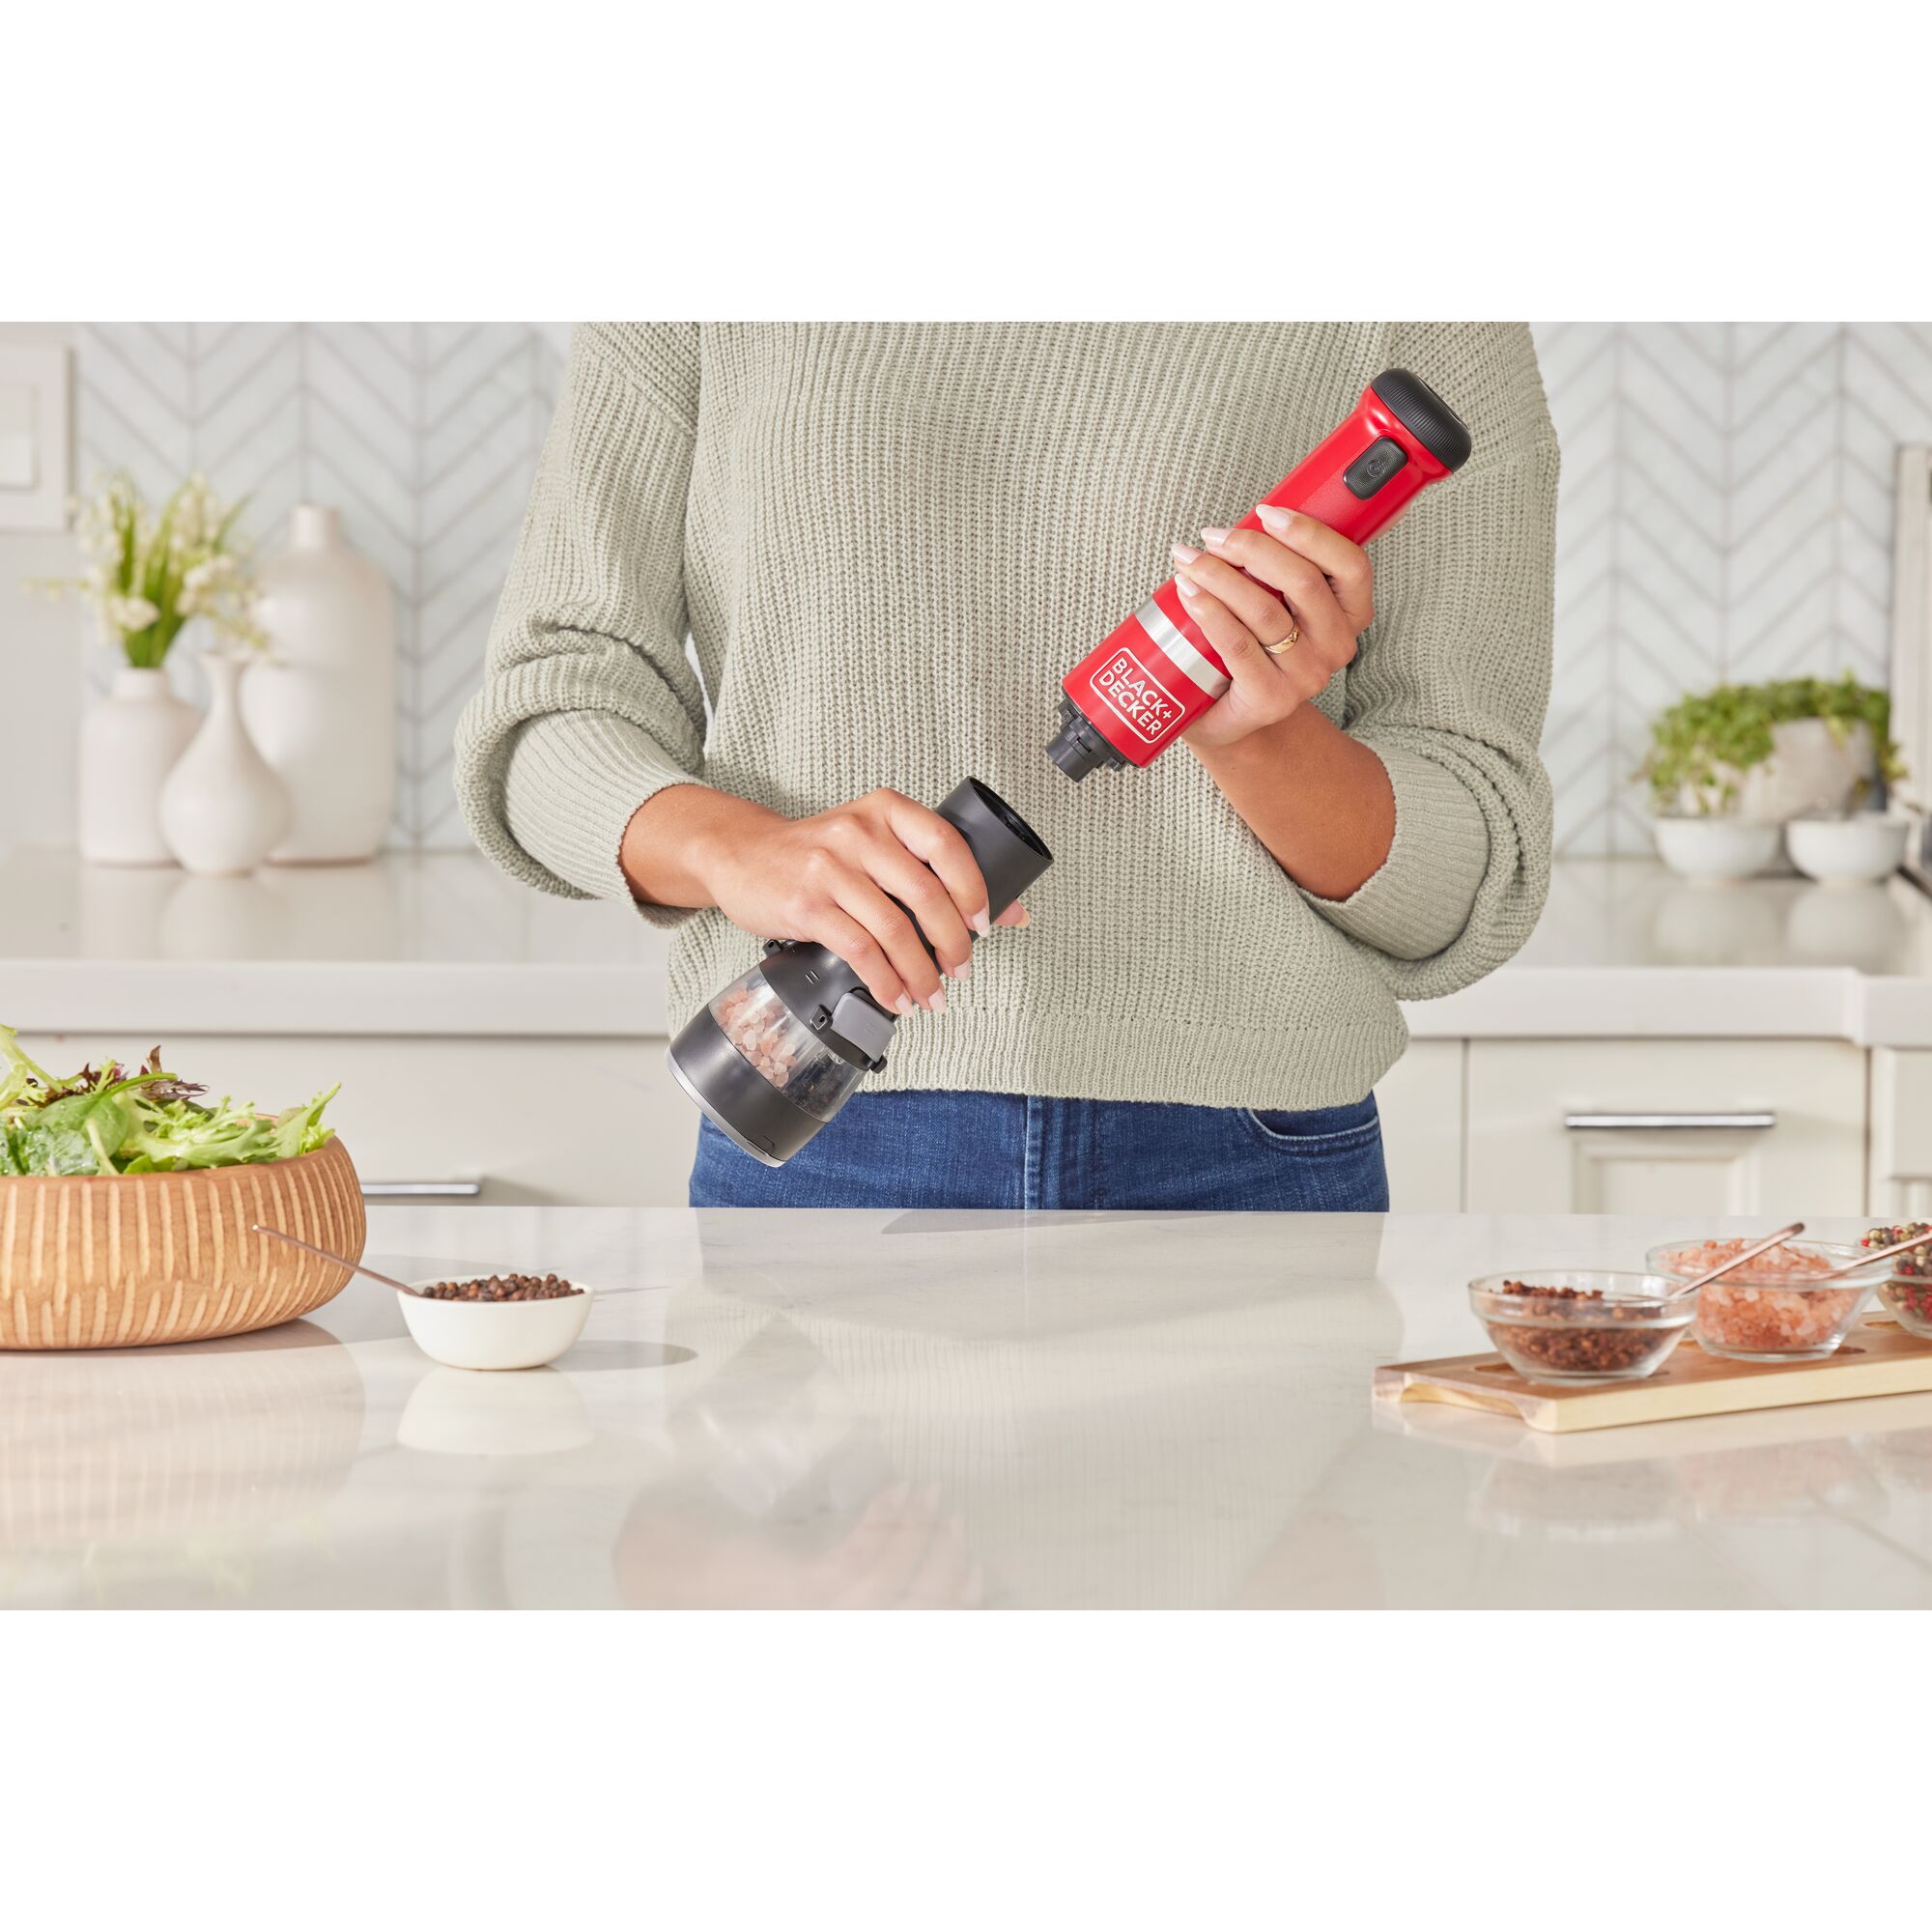 Talent showing how to attach the BLACK+DECKER kitchen wand spice grinder attachment to the red power unit